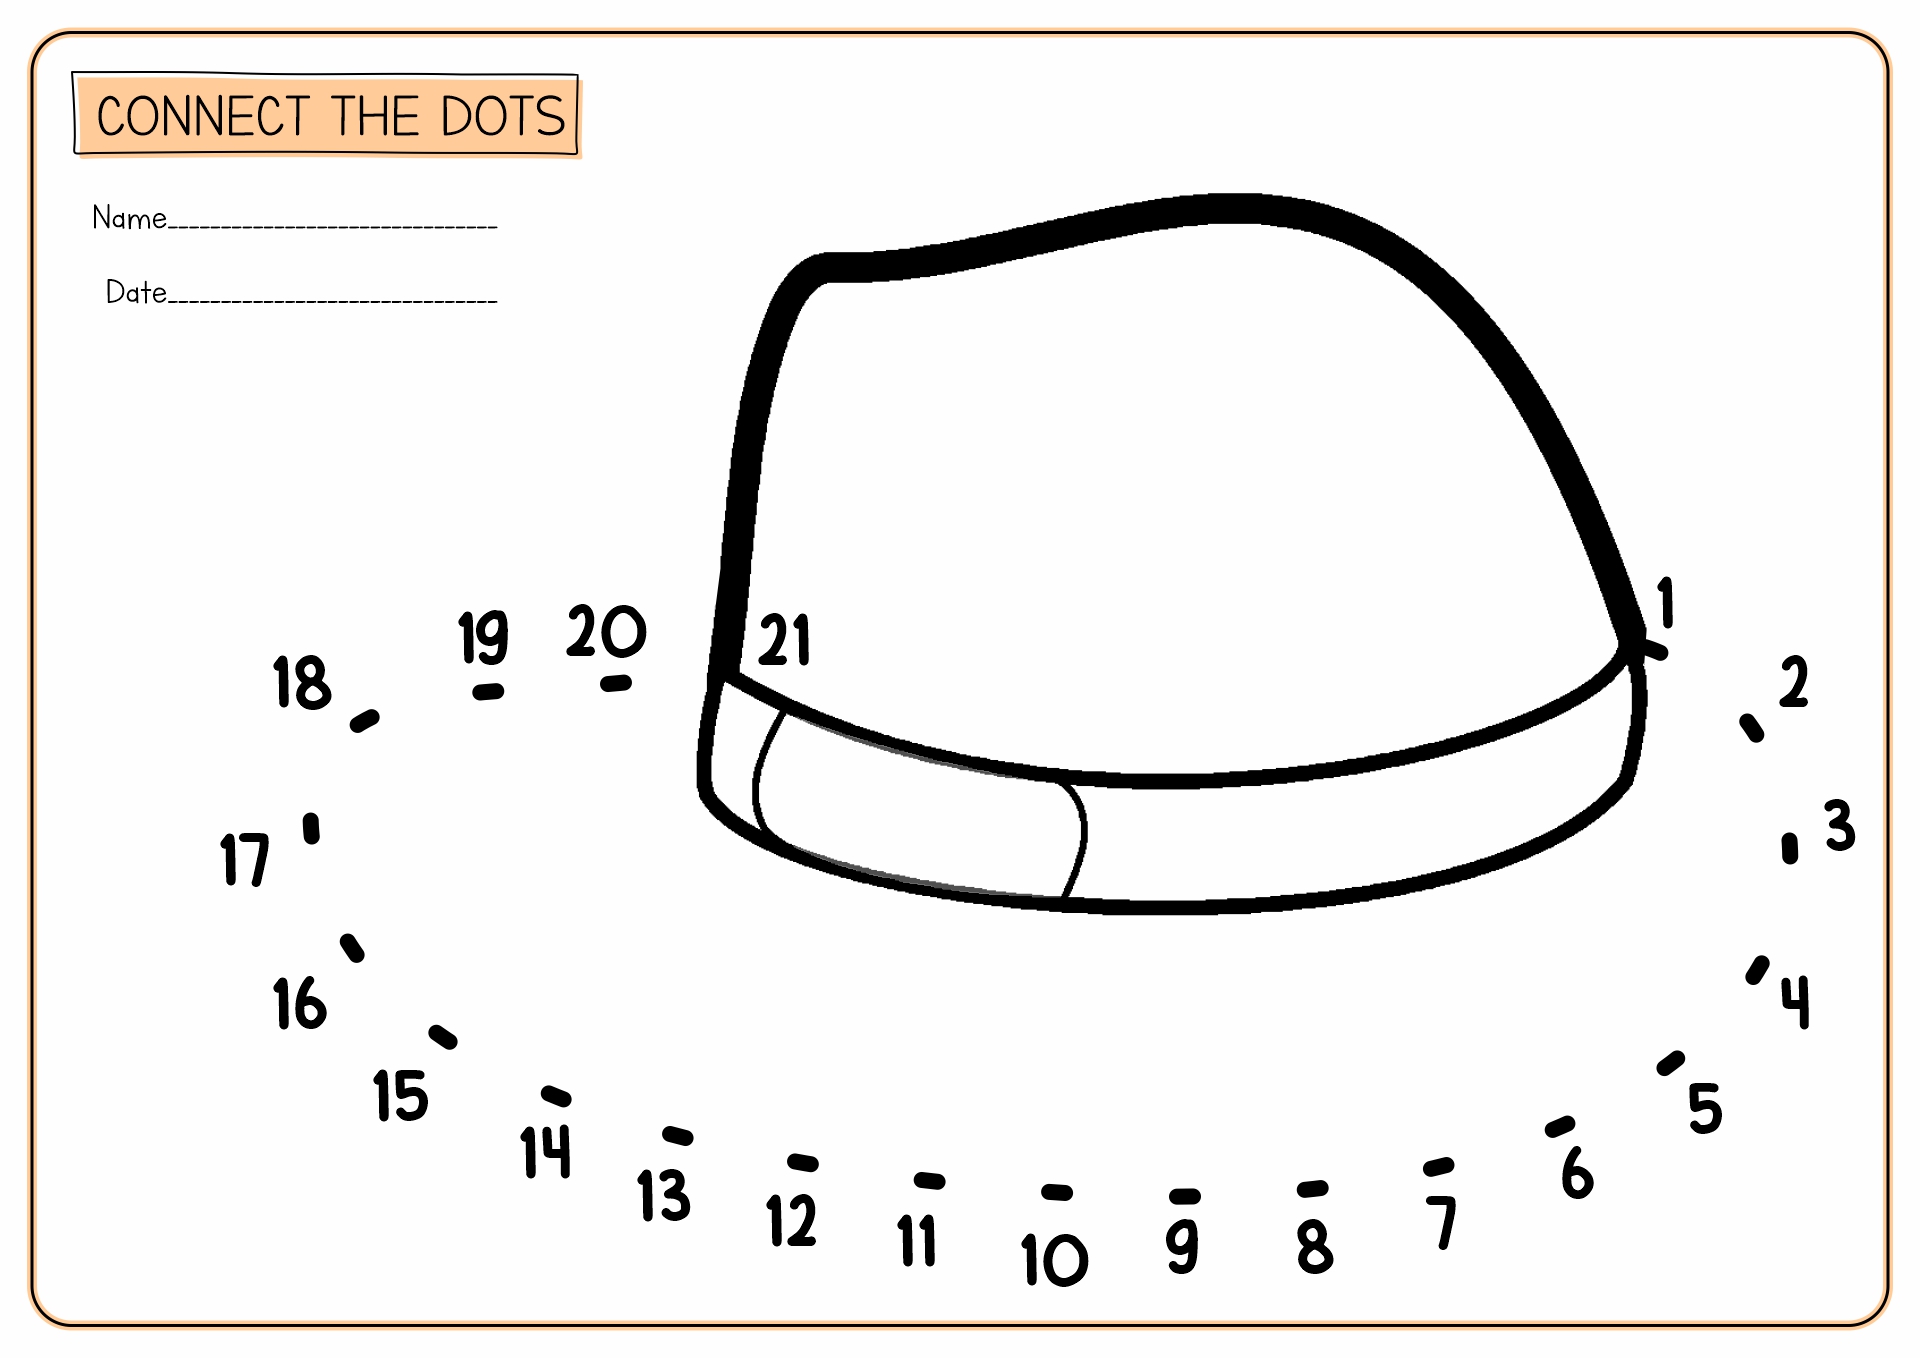 Connect the Dots Worksheets for Preschoolers Image